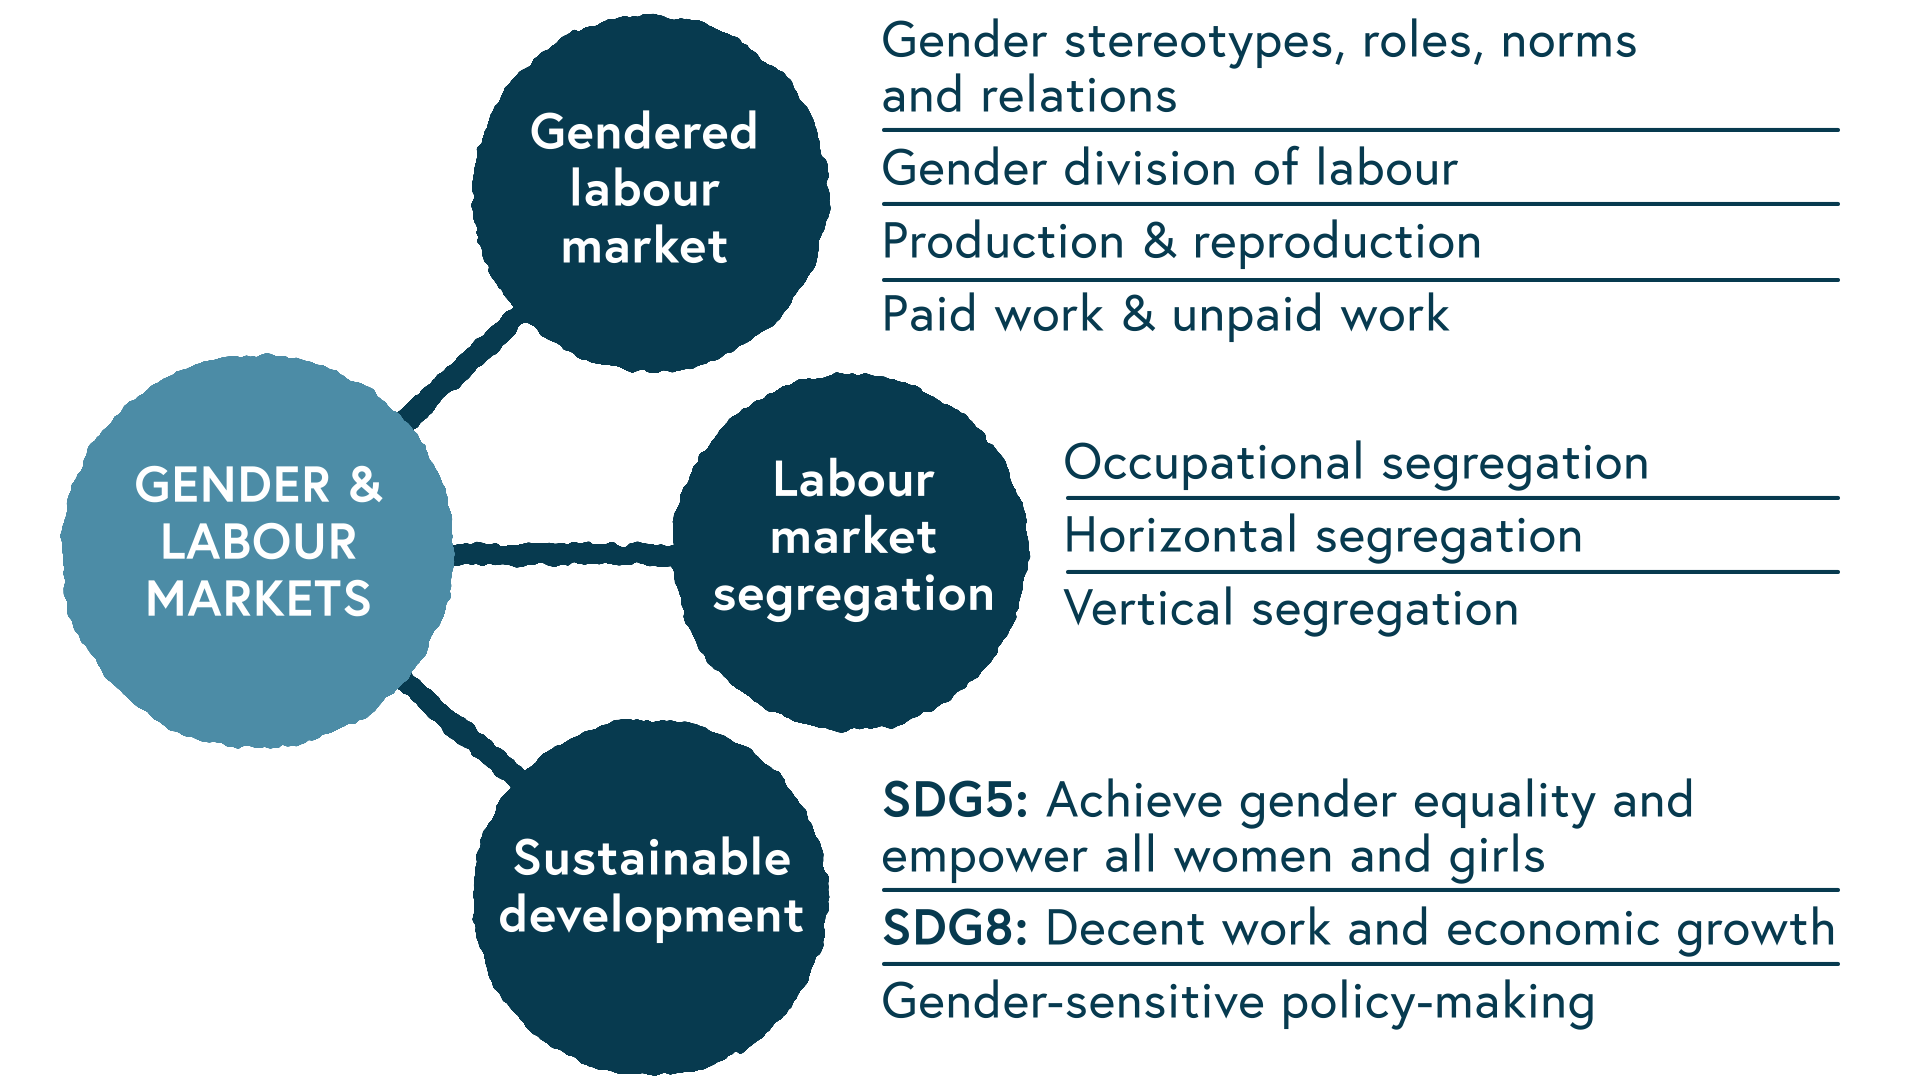 Diagram depicting the relationship between gender and labour market as explored in the first chapter of this course. On the left-hand side is a circle with the words “Gender and Labour Markets”. From this circle, three lines lead to subcategories, also represented as circles. The first subcategory is “Gendered labour market”. It includes the following topics: “Gender stereotypes, roles, norms and relations; Gender division of labour, Production & reproduction; Paid work & unpaid work. The second subcategory is “Labour market segregation” with the topics occupational segregation, horizontal segregation and vertical segregation. The third subcategory is “Sustainable development” with the two subgoals of the Agenda 2030: SDG 5, Achieve gender equality and empower all women and girls, and SDG8: Decent work and economic growth. In addition, this subcategory entails “gender-sensitive policy-making”.